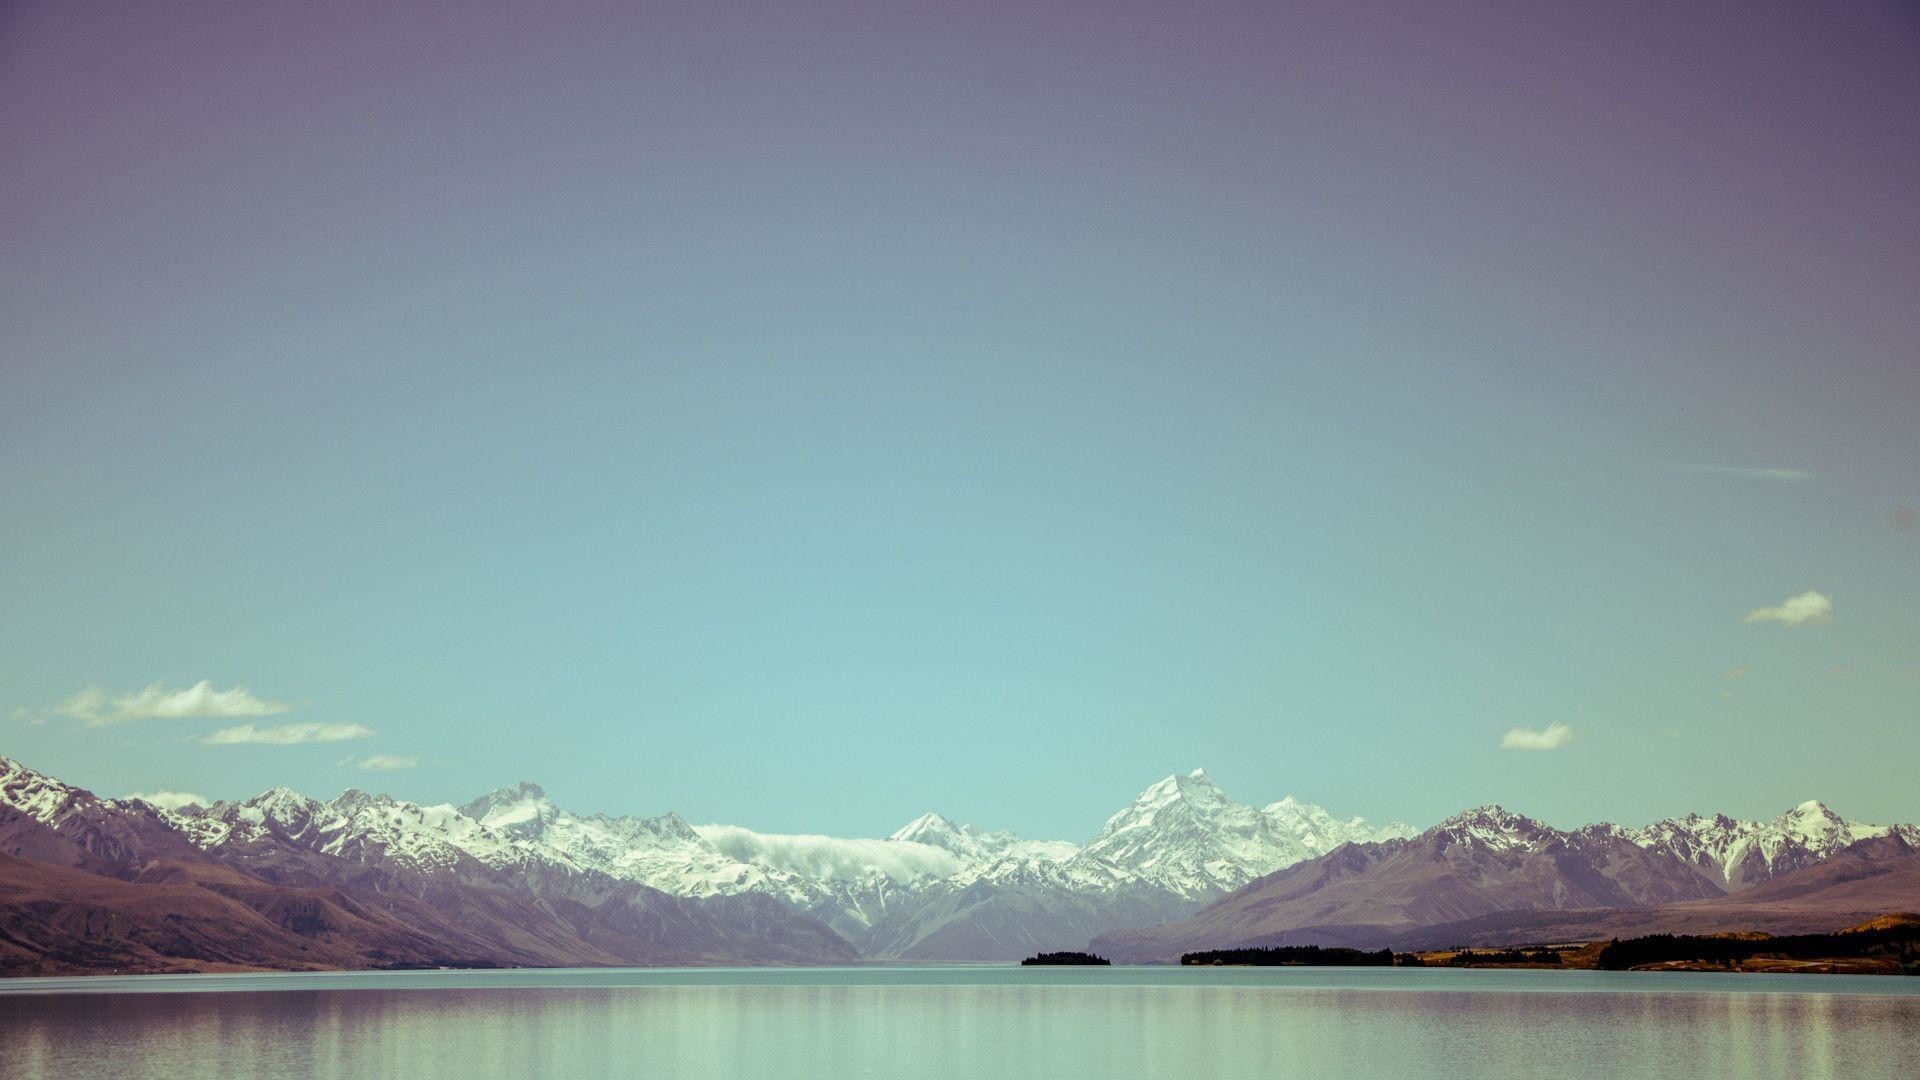 1920x1080 Soothing Desktop Backgrounds. Wallpaperfm Â· Other Â· Blue Sky, Snowy  Mountains - HD Wallpapers 